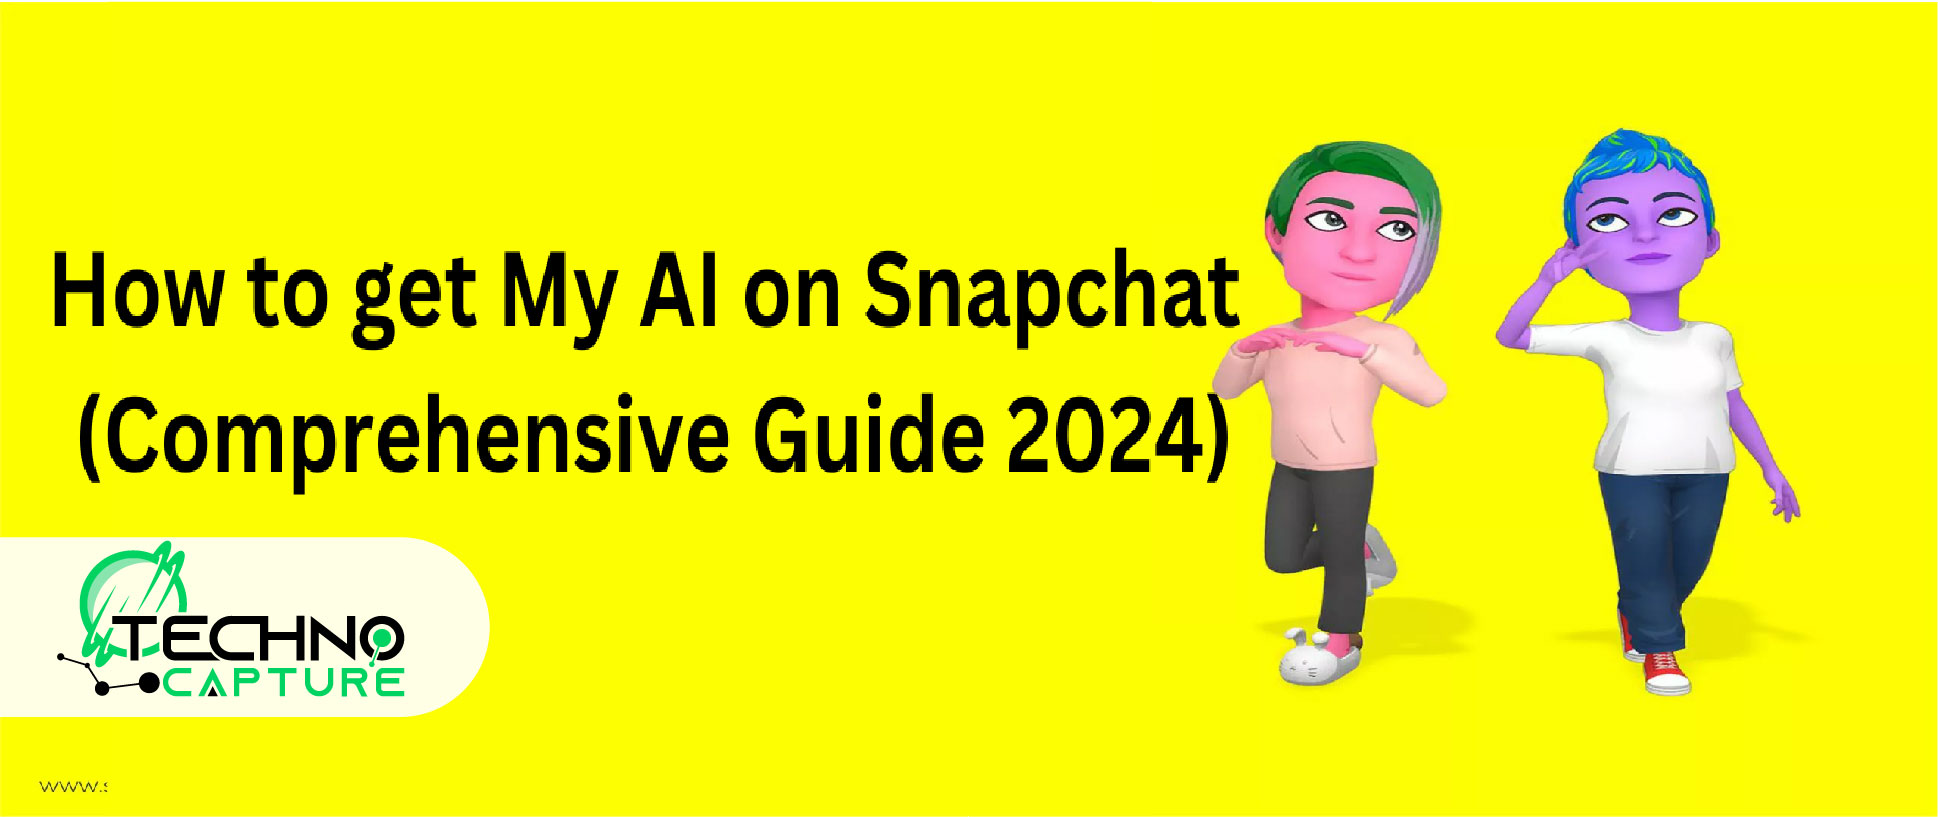 How to Get My AI on Snapchat (Comprehensive Guide 2024)